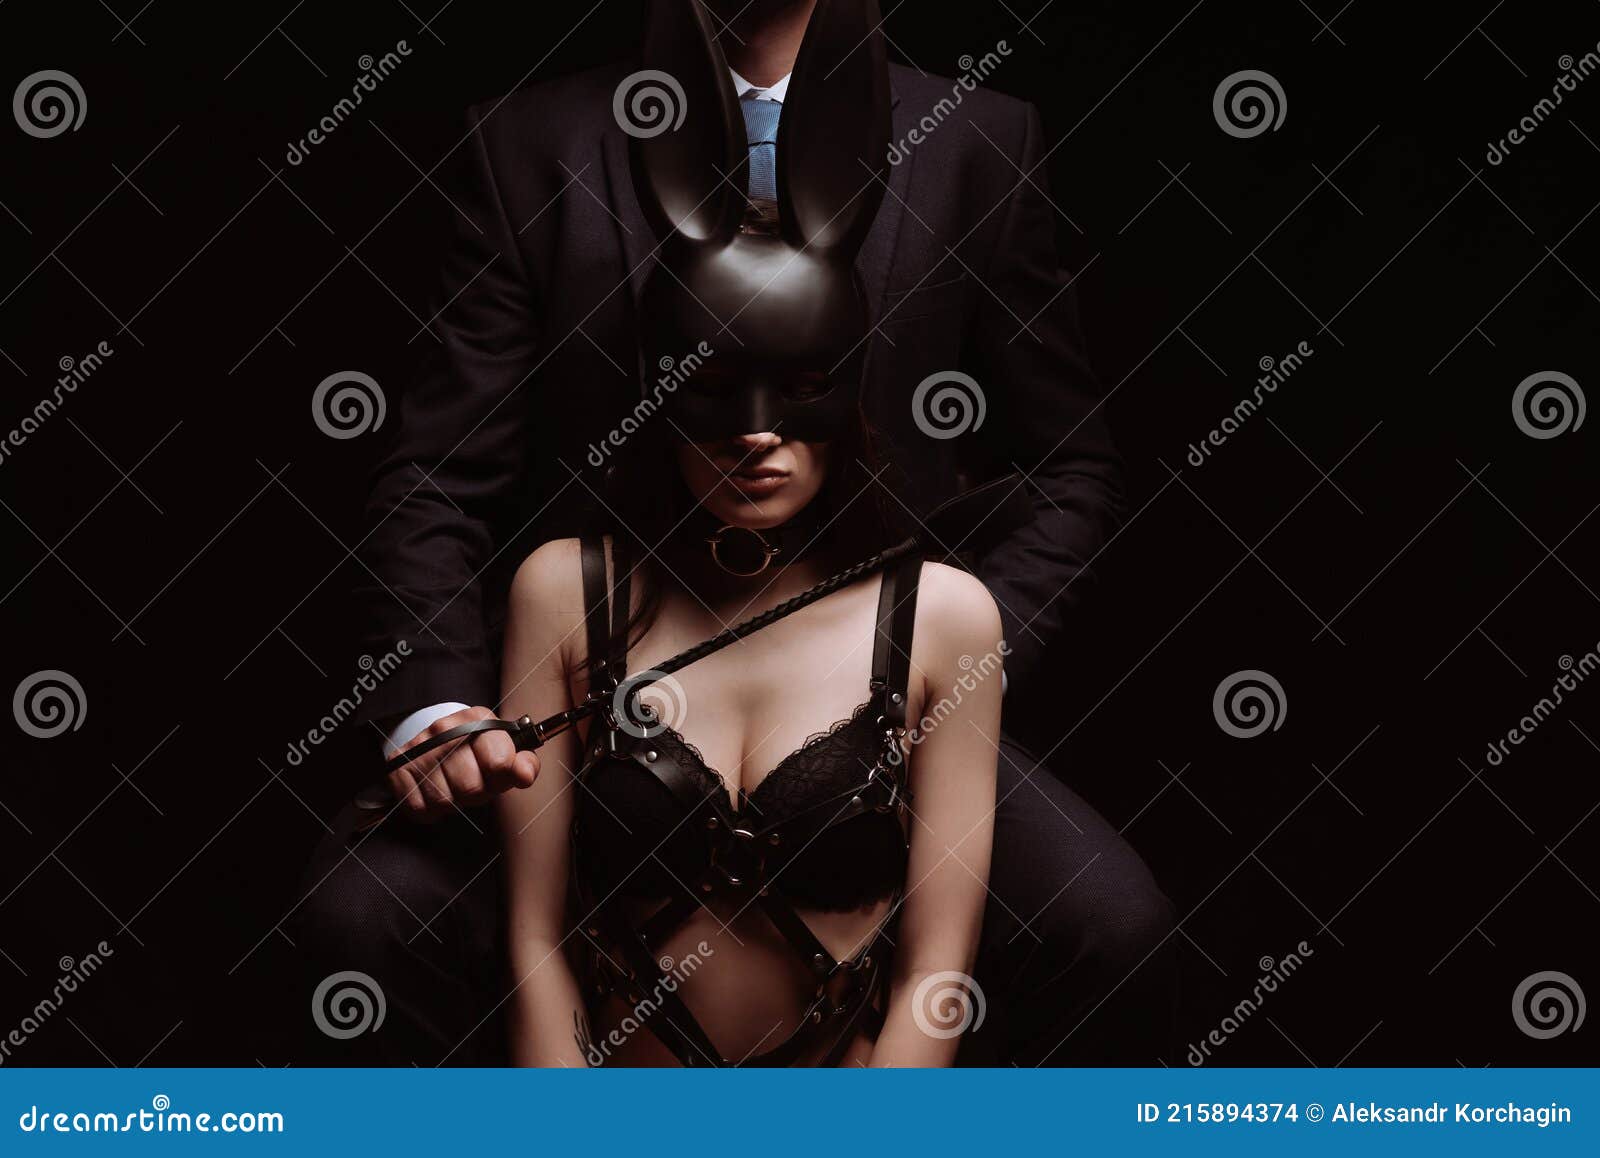 Dominant Man with a Flogger Whip and a Submissive Girl in a Mask and Leather Belt Stock Photo picture